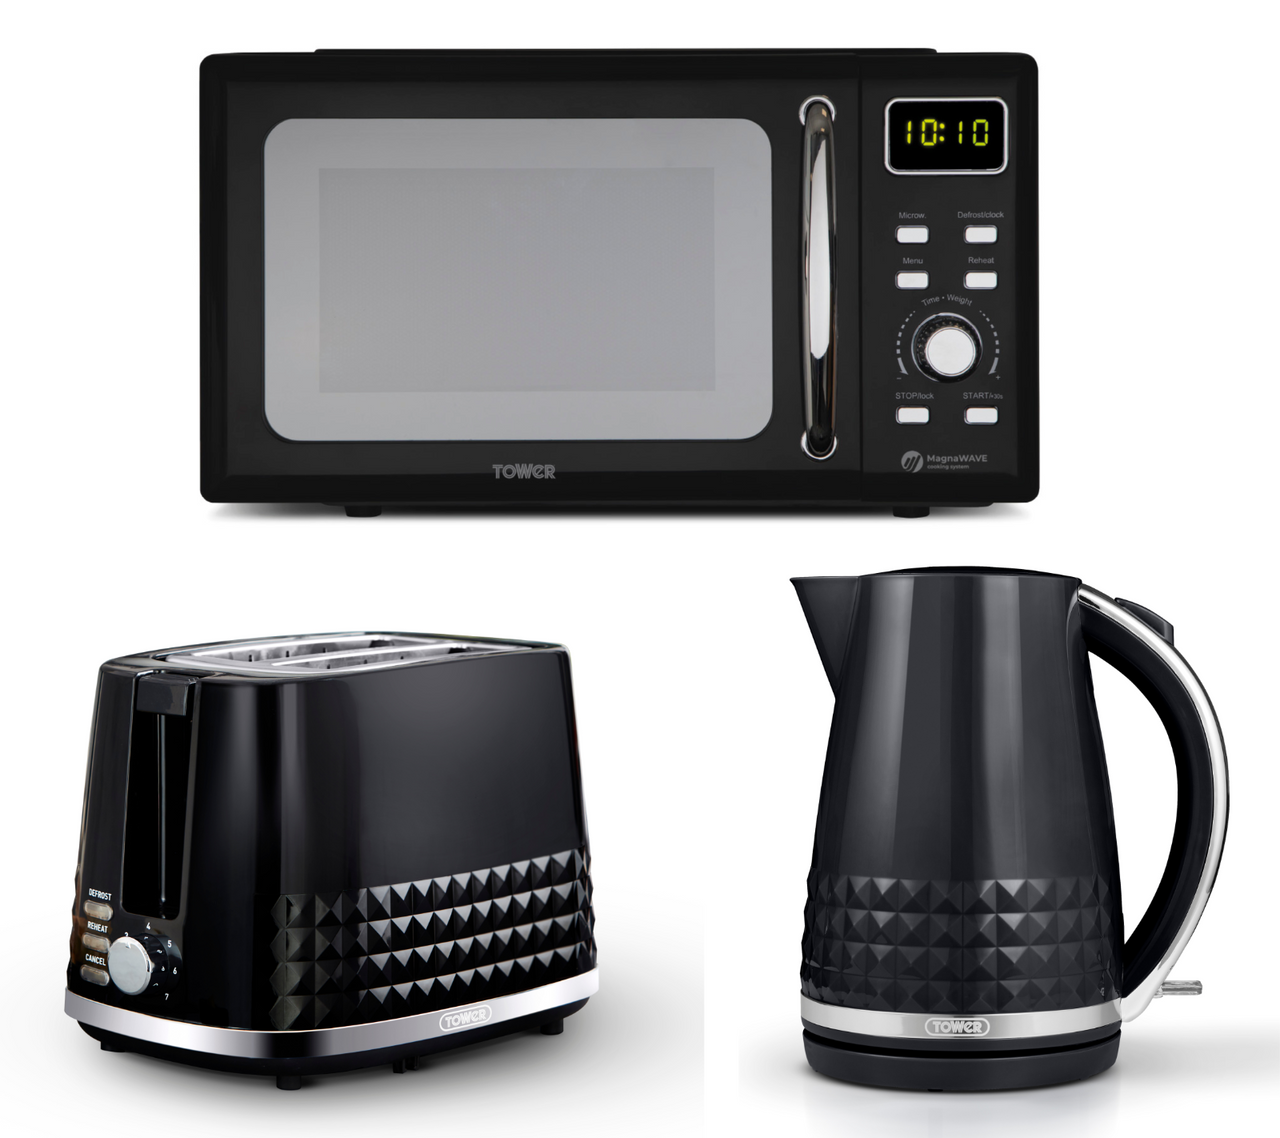 Tower Solitaire 3KW 1.5L Kettle 2 Slice Toaster & 800W 20L Digital Microwave Set in Black with Chrome Accents